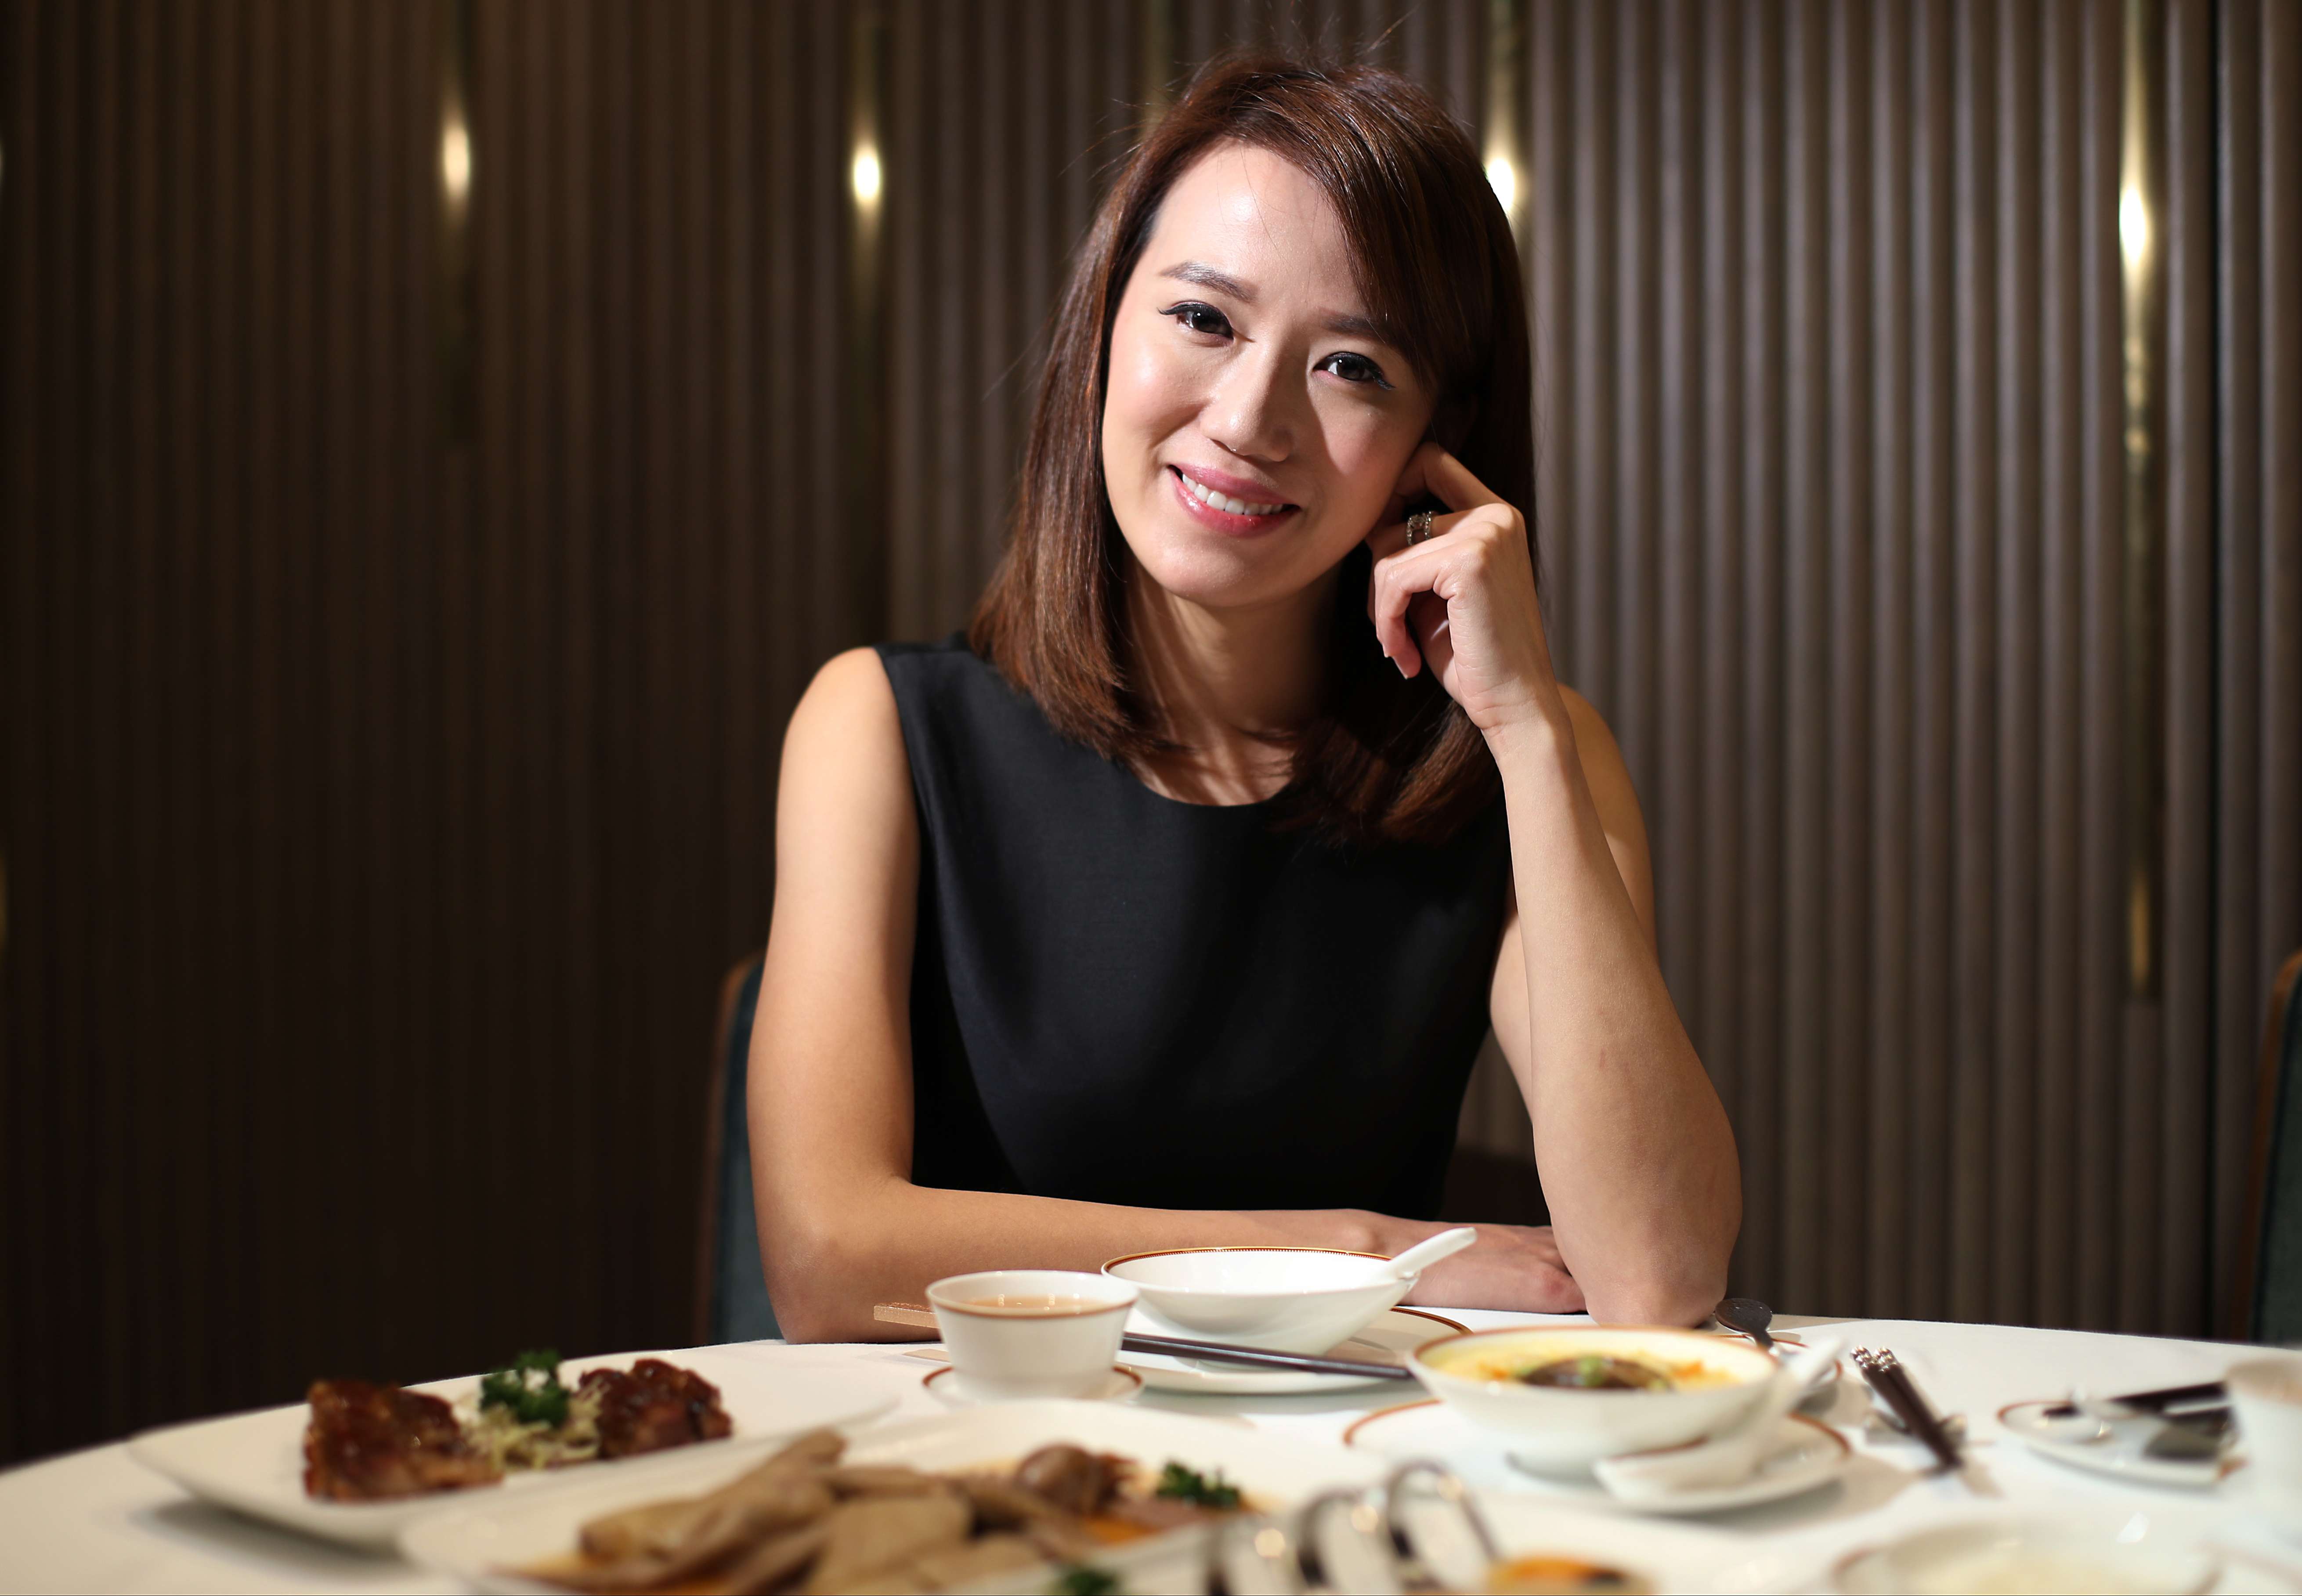 Founder of online recipe hub Day Day Cook found success when she saw an opportunity in the market to produce quality recipes and dishes online